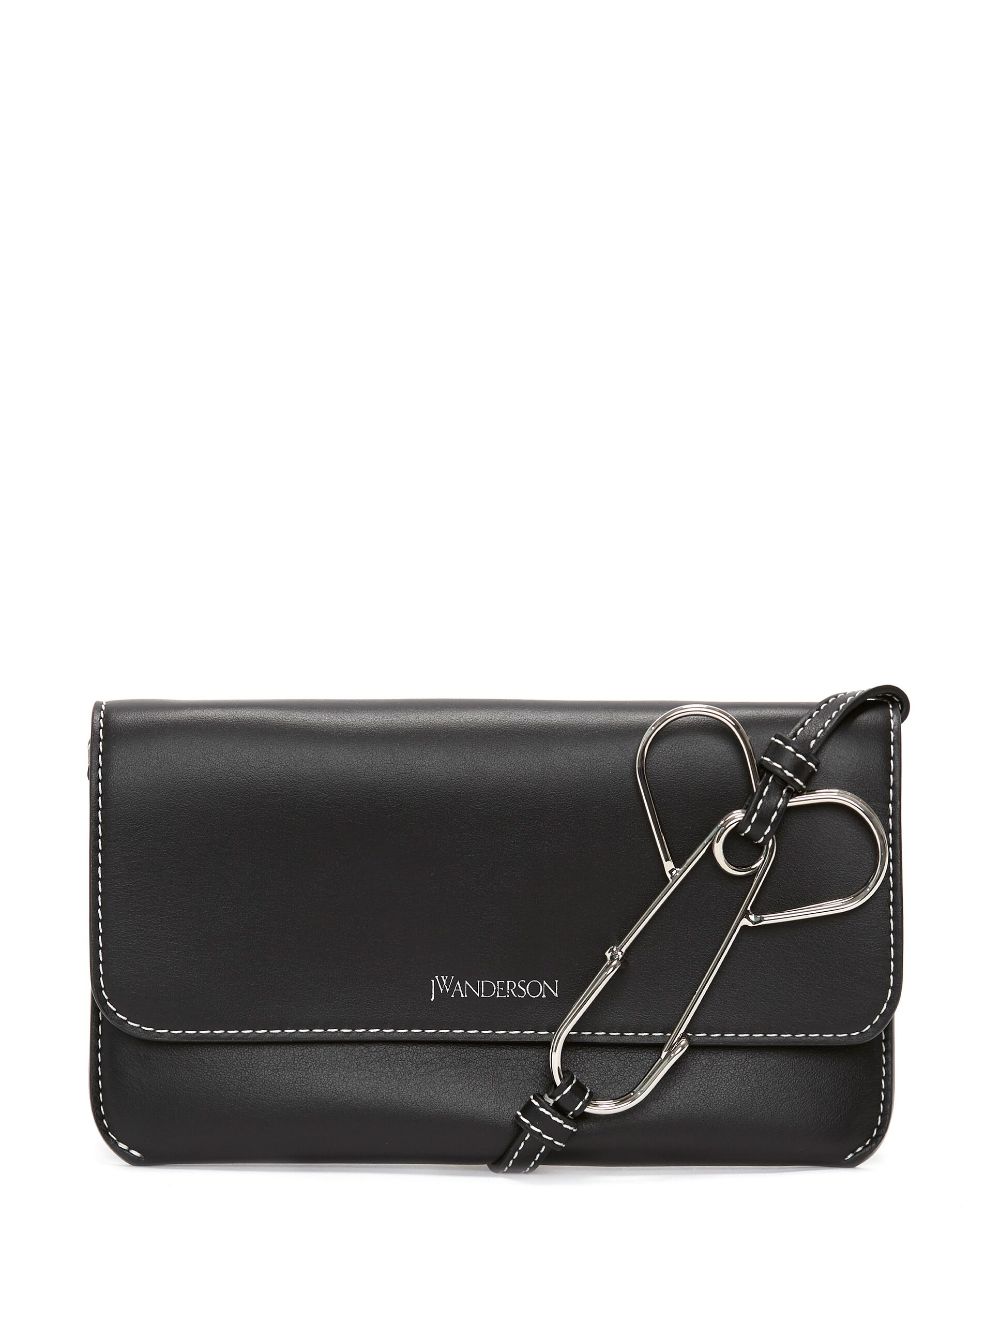 JW Anderson phone leather pouch bag - Black